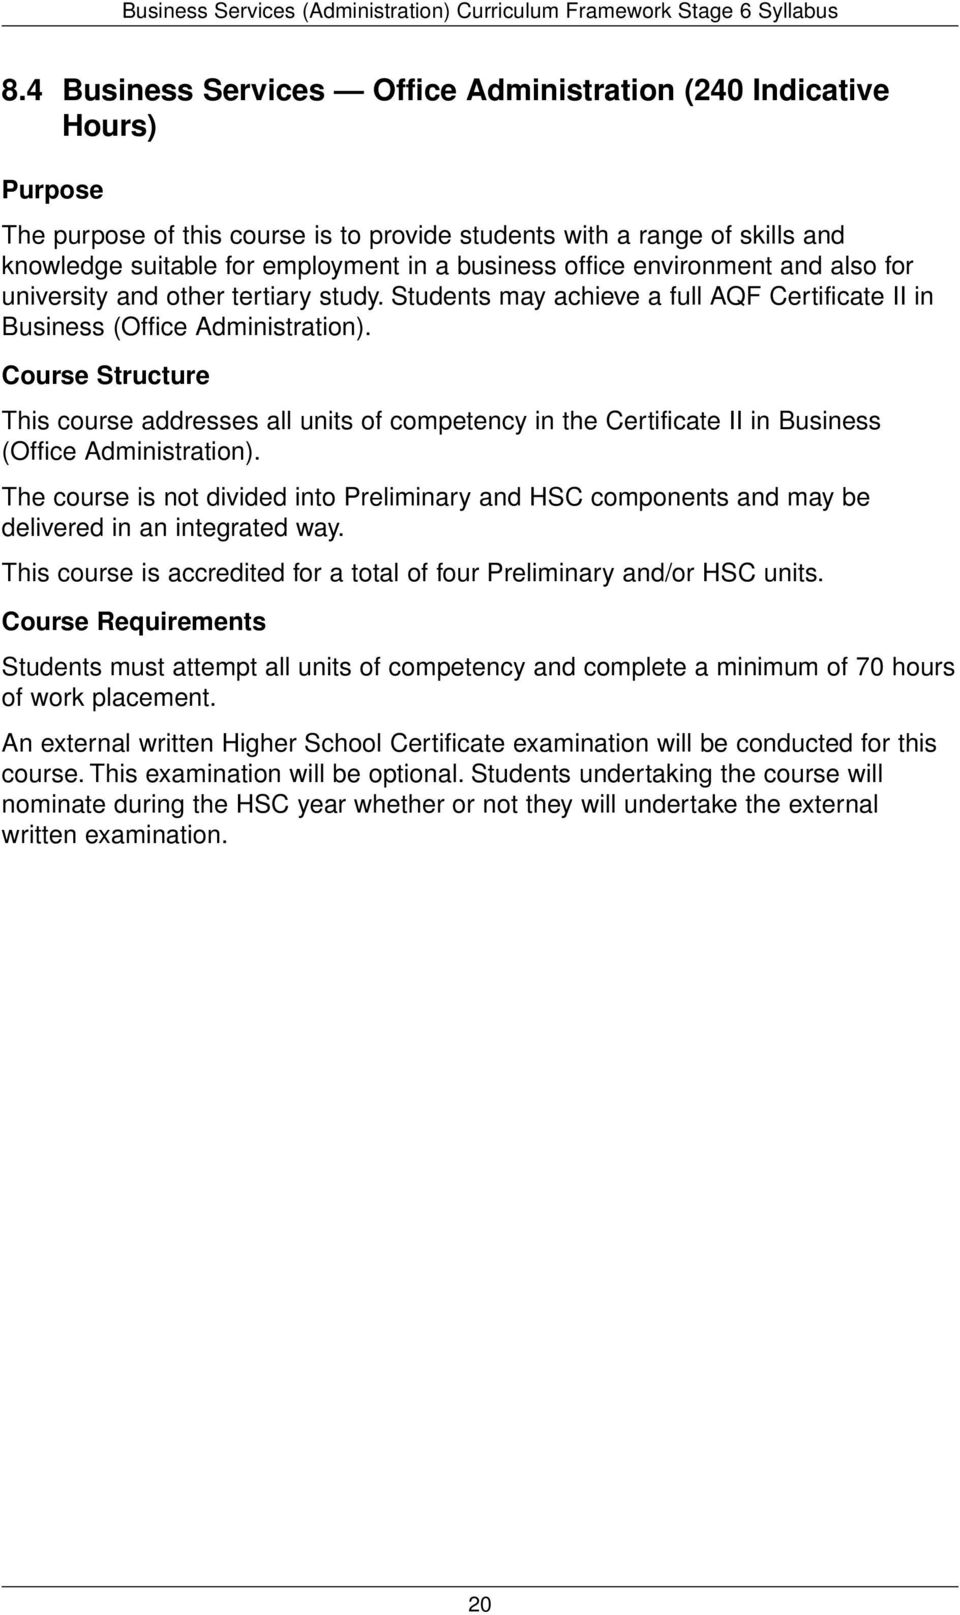 Course Structure This course addresses all units of competency in the Certificate II in Business (Office Administration).